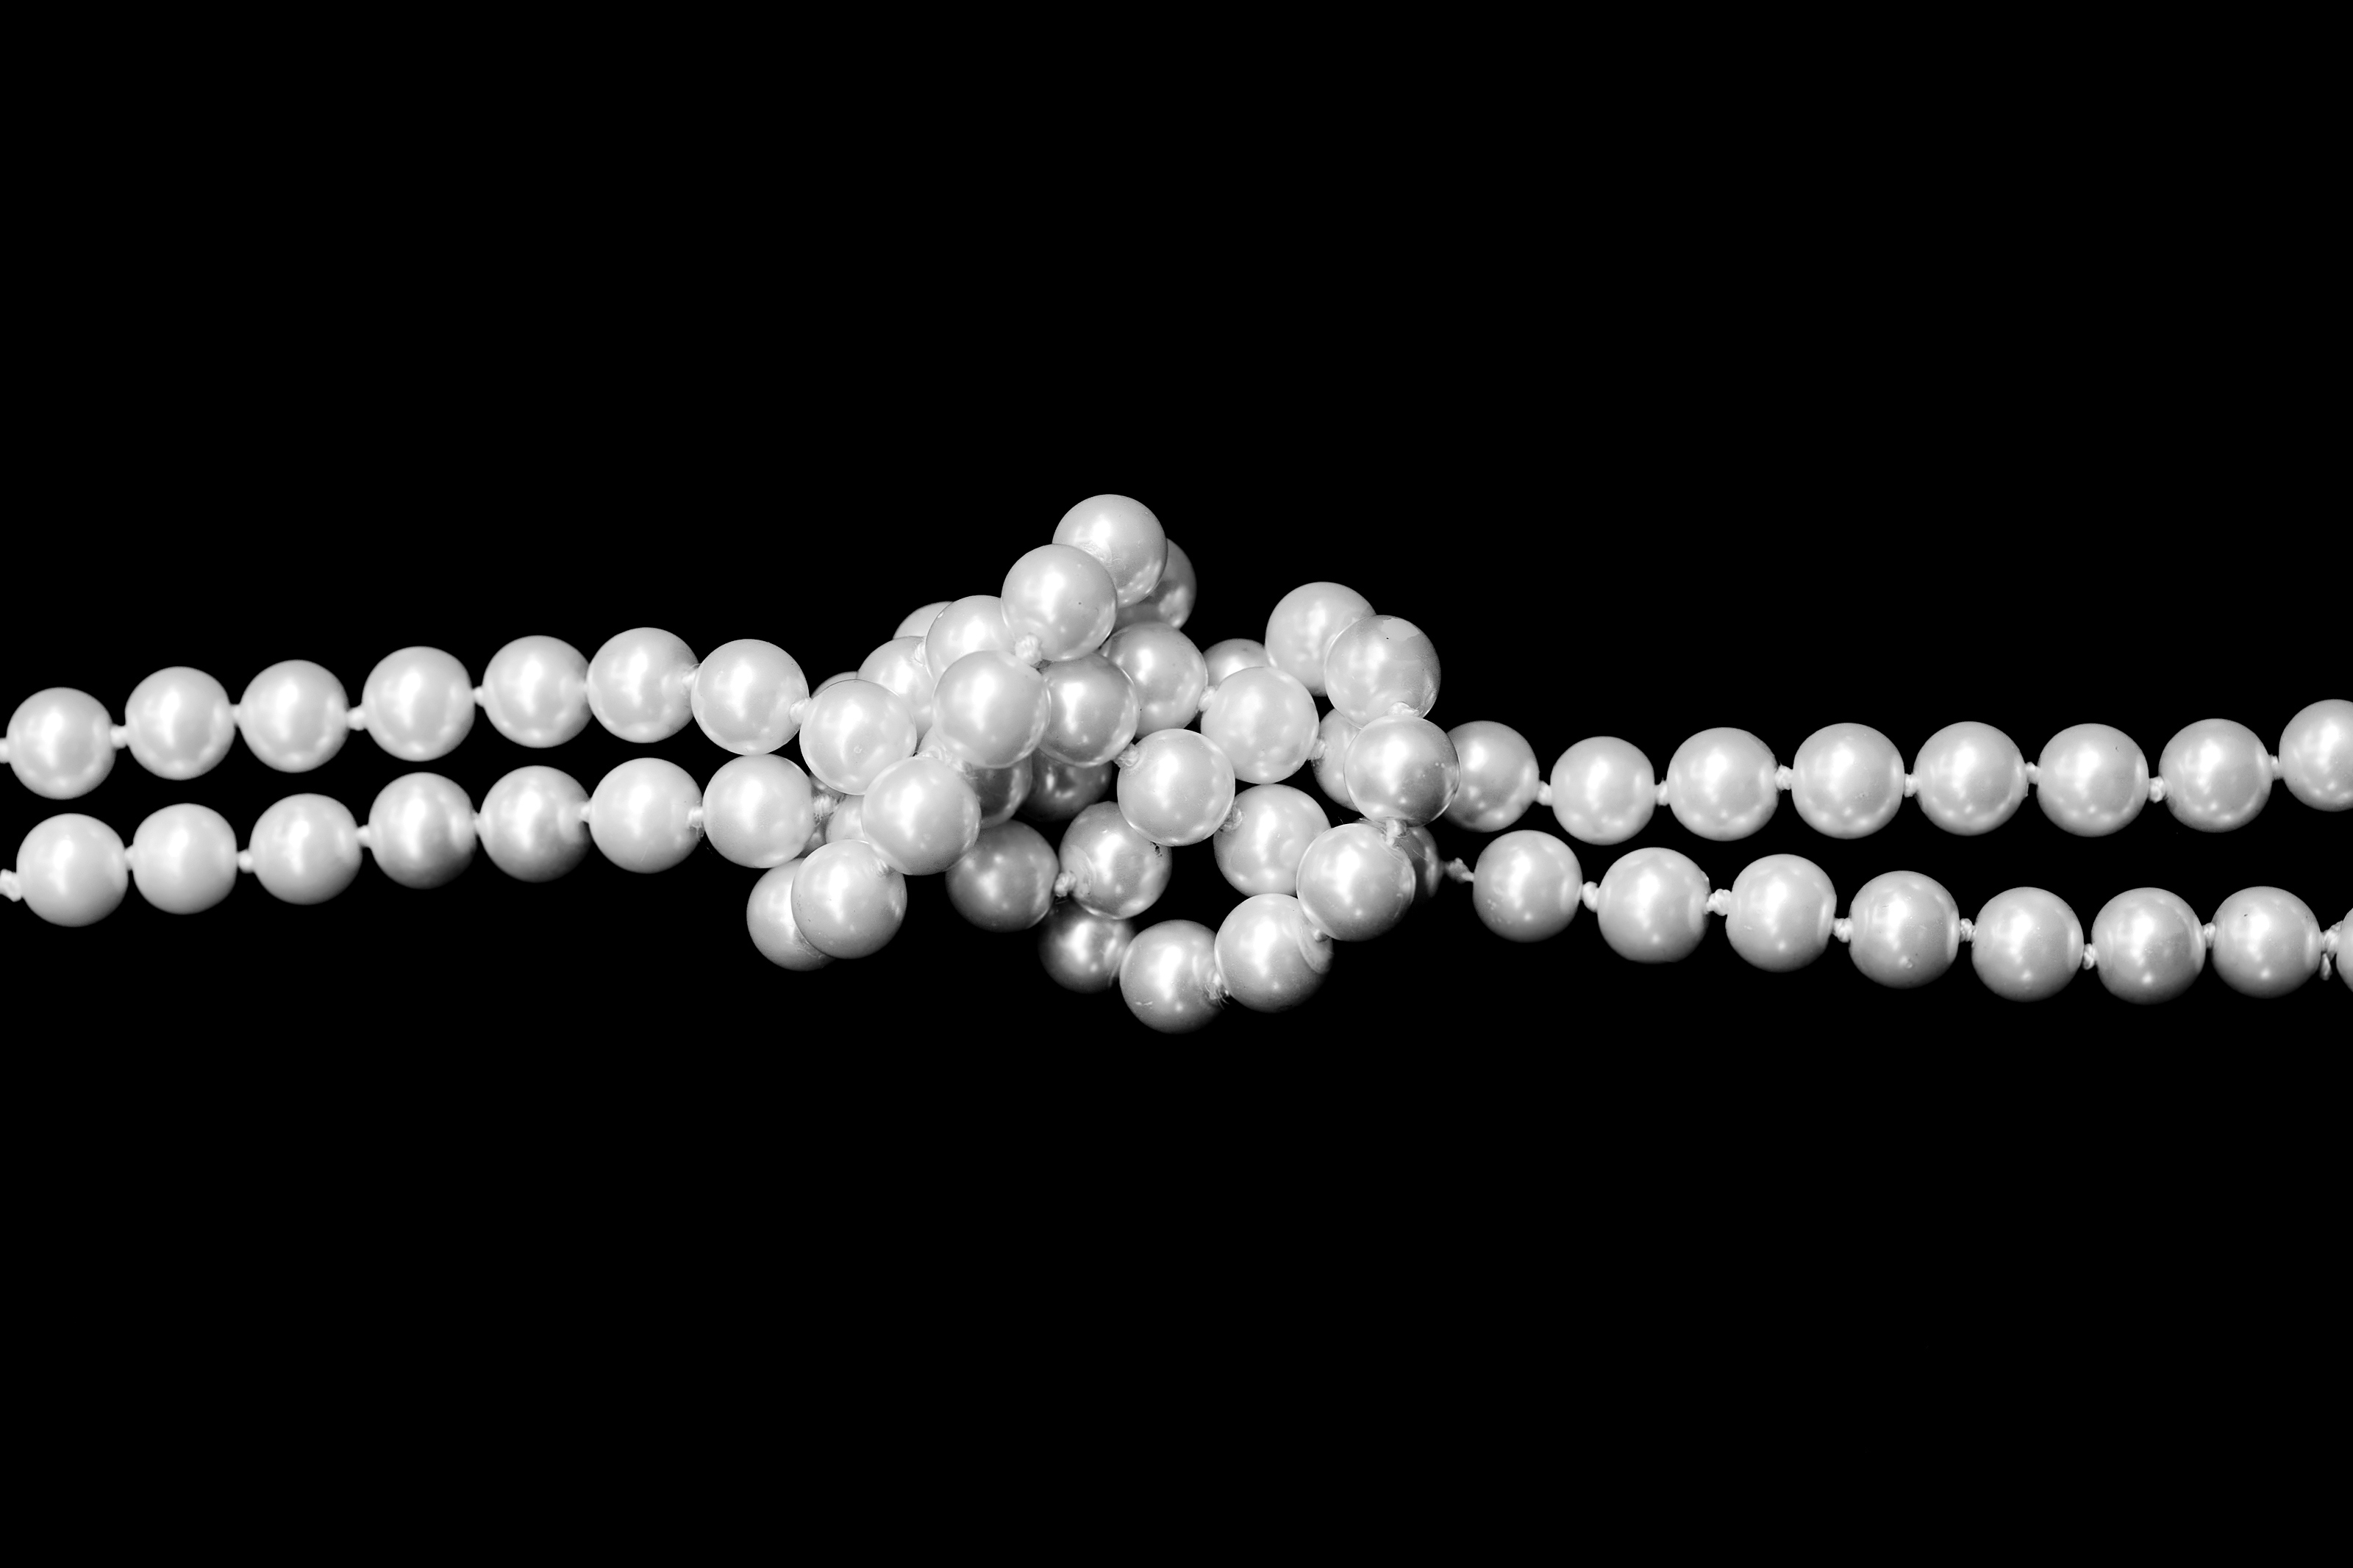 Double strand of pearls tied in a knot over black background. Chromosomes look like long necklaces of DNA in the center of every cell in the body. Some parts of the necklace are open and loose, others are coiled tightly. New research shows that as we age, some sections of our chromosomes curl and close up, making it harder for cells to access genes critical to defense against disease. (Getty Images)